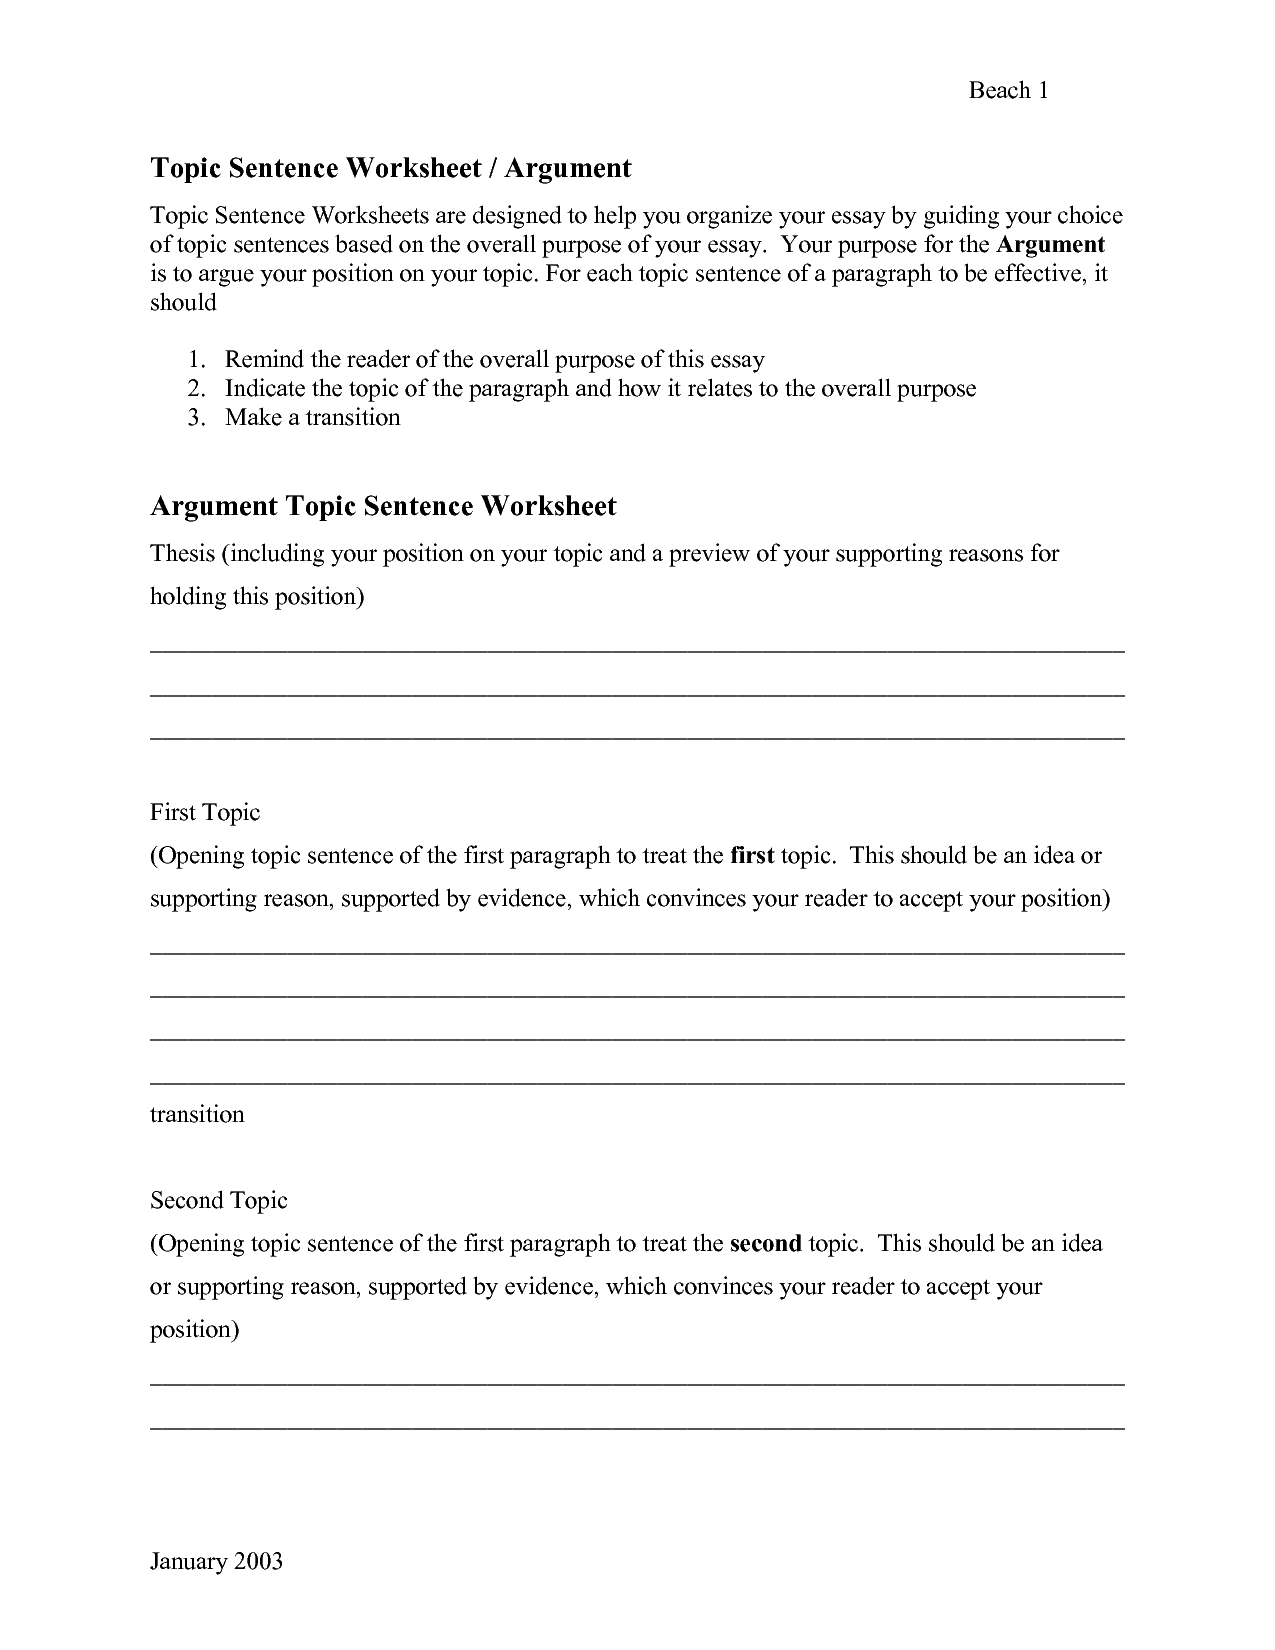 11-best-images-of-topic-sentence-worksheets-writing-topic-sentences-worksheets-topic-sentence